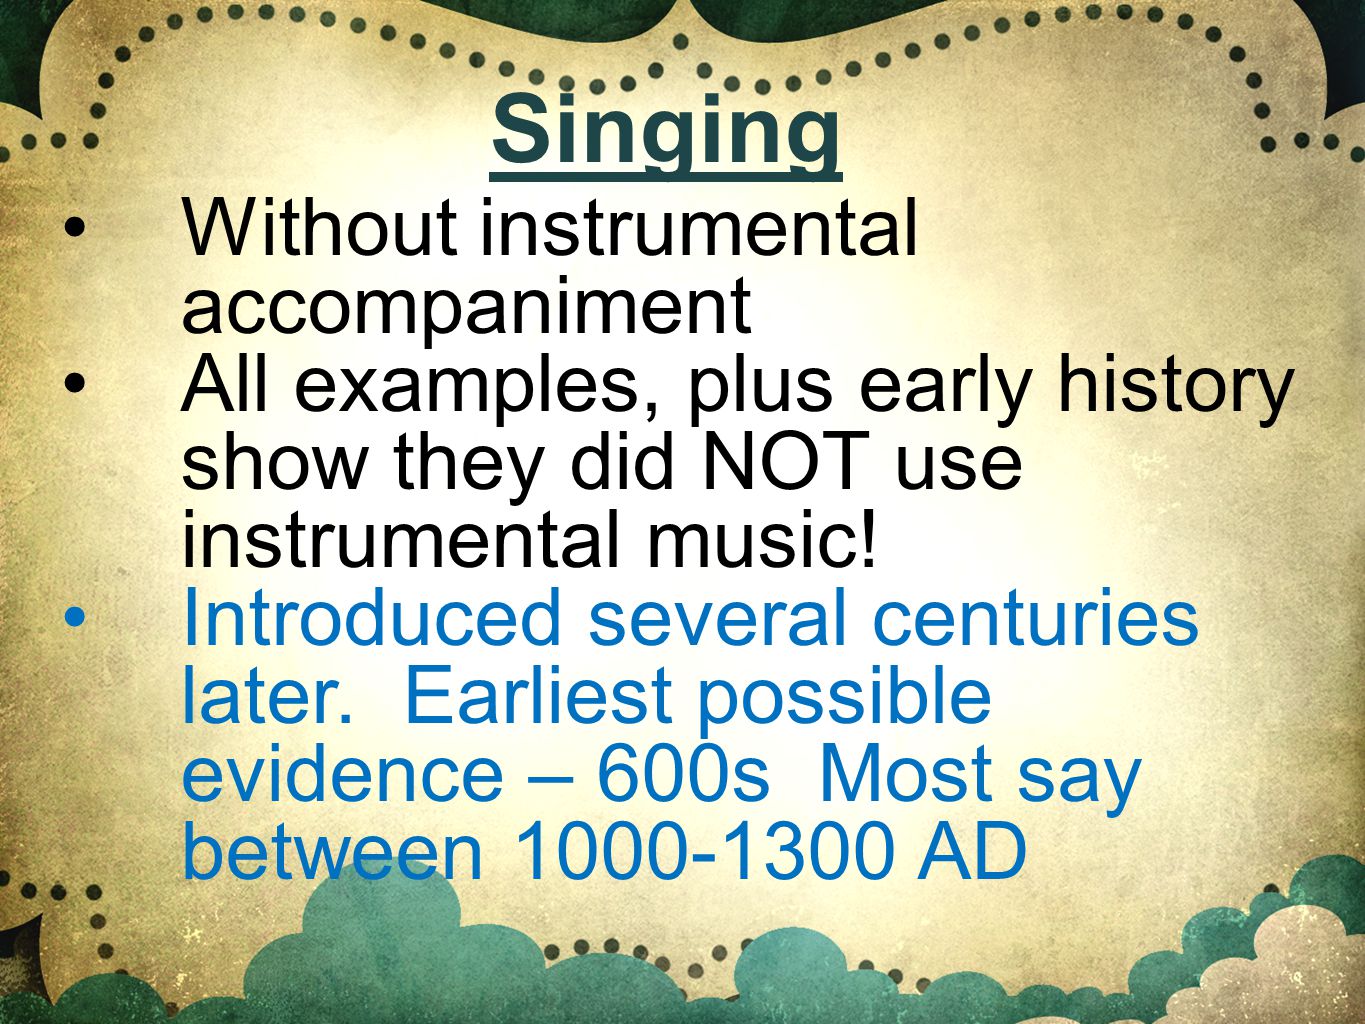 Without instrumental accompaniment All examples, plus early history show they did NOT use instrumental music.